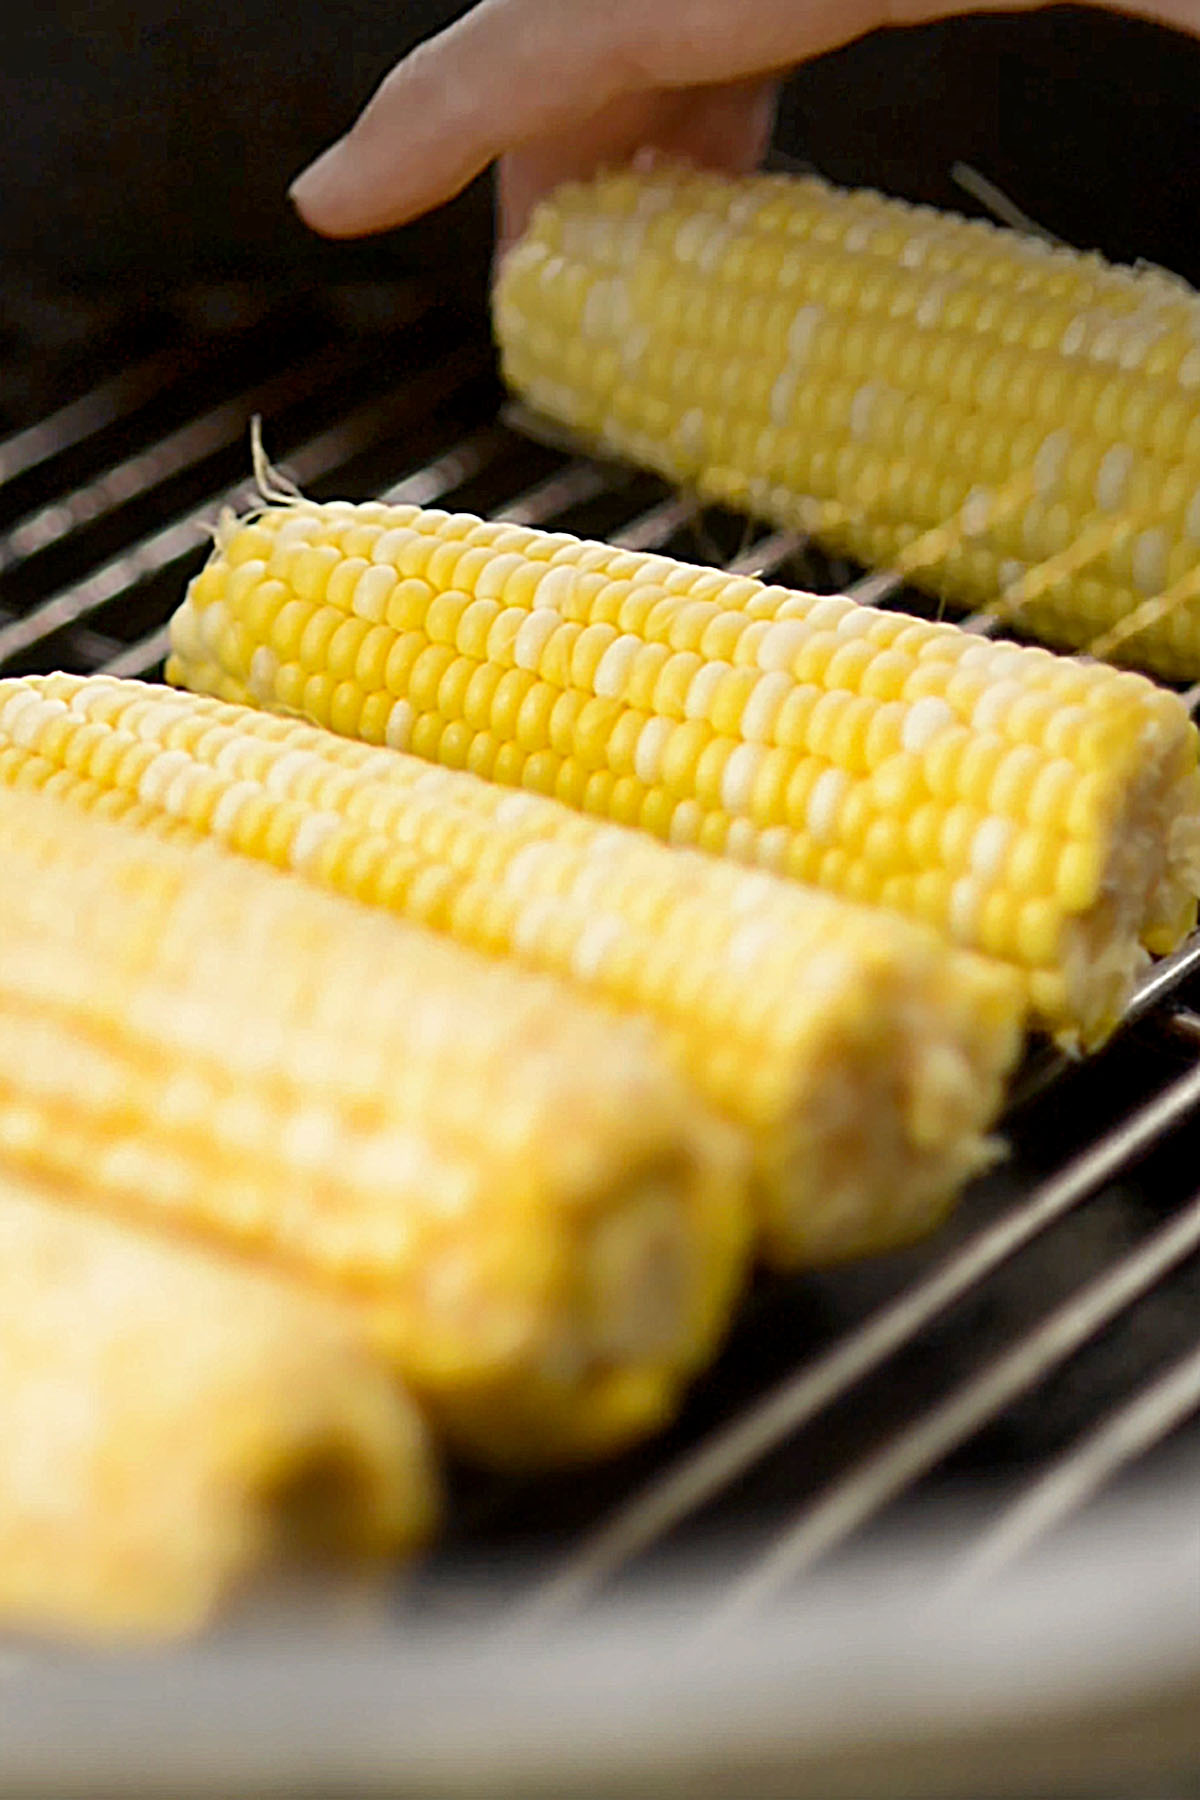 Corn on the cob being roasted on the grill.